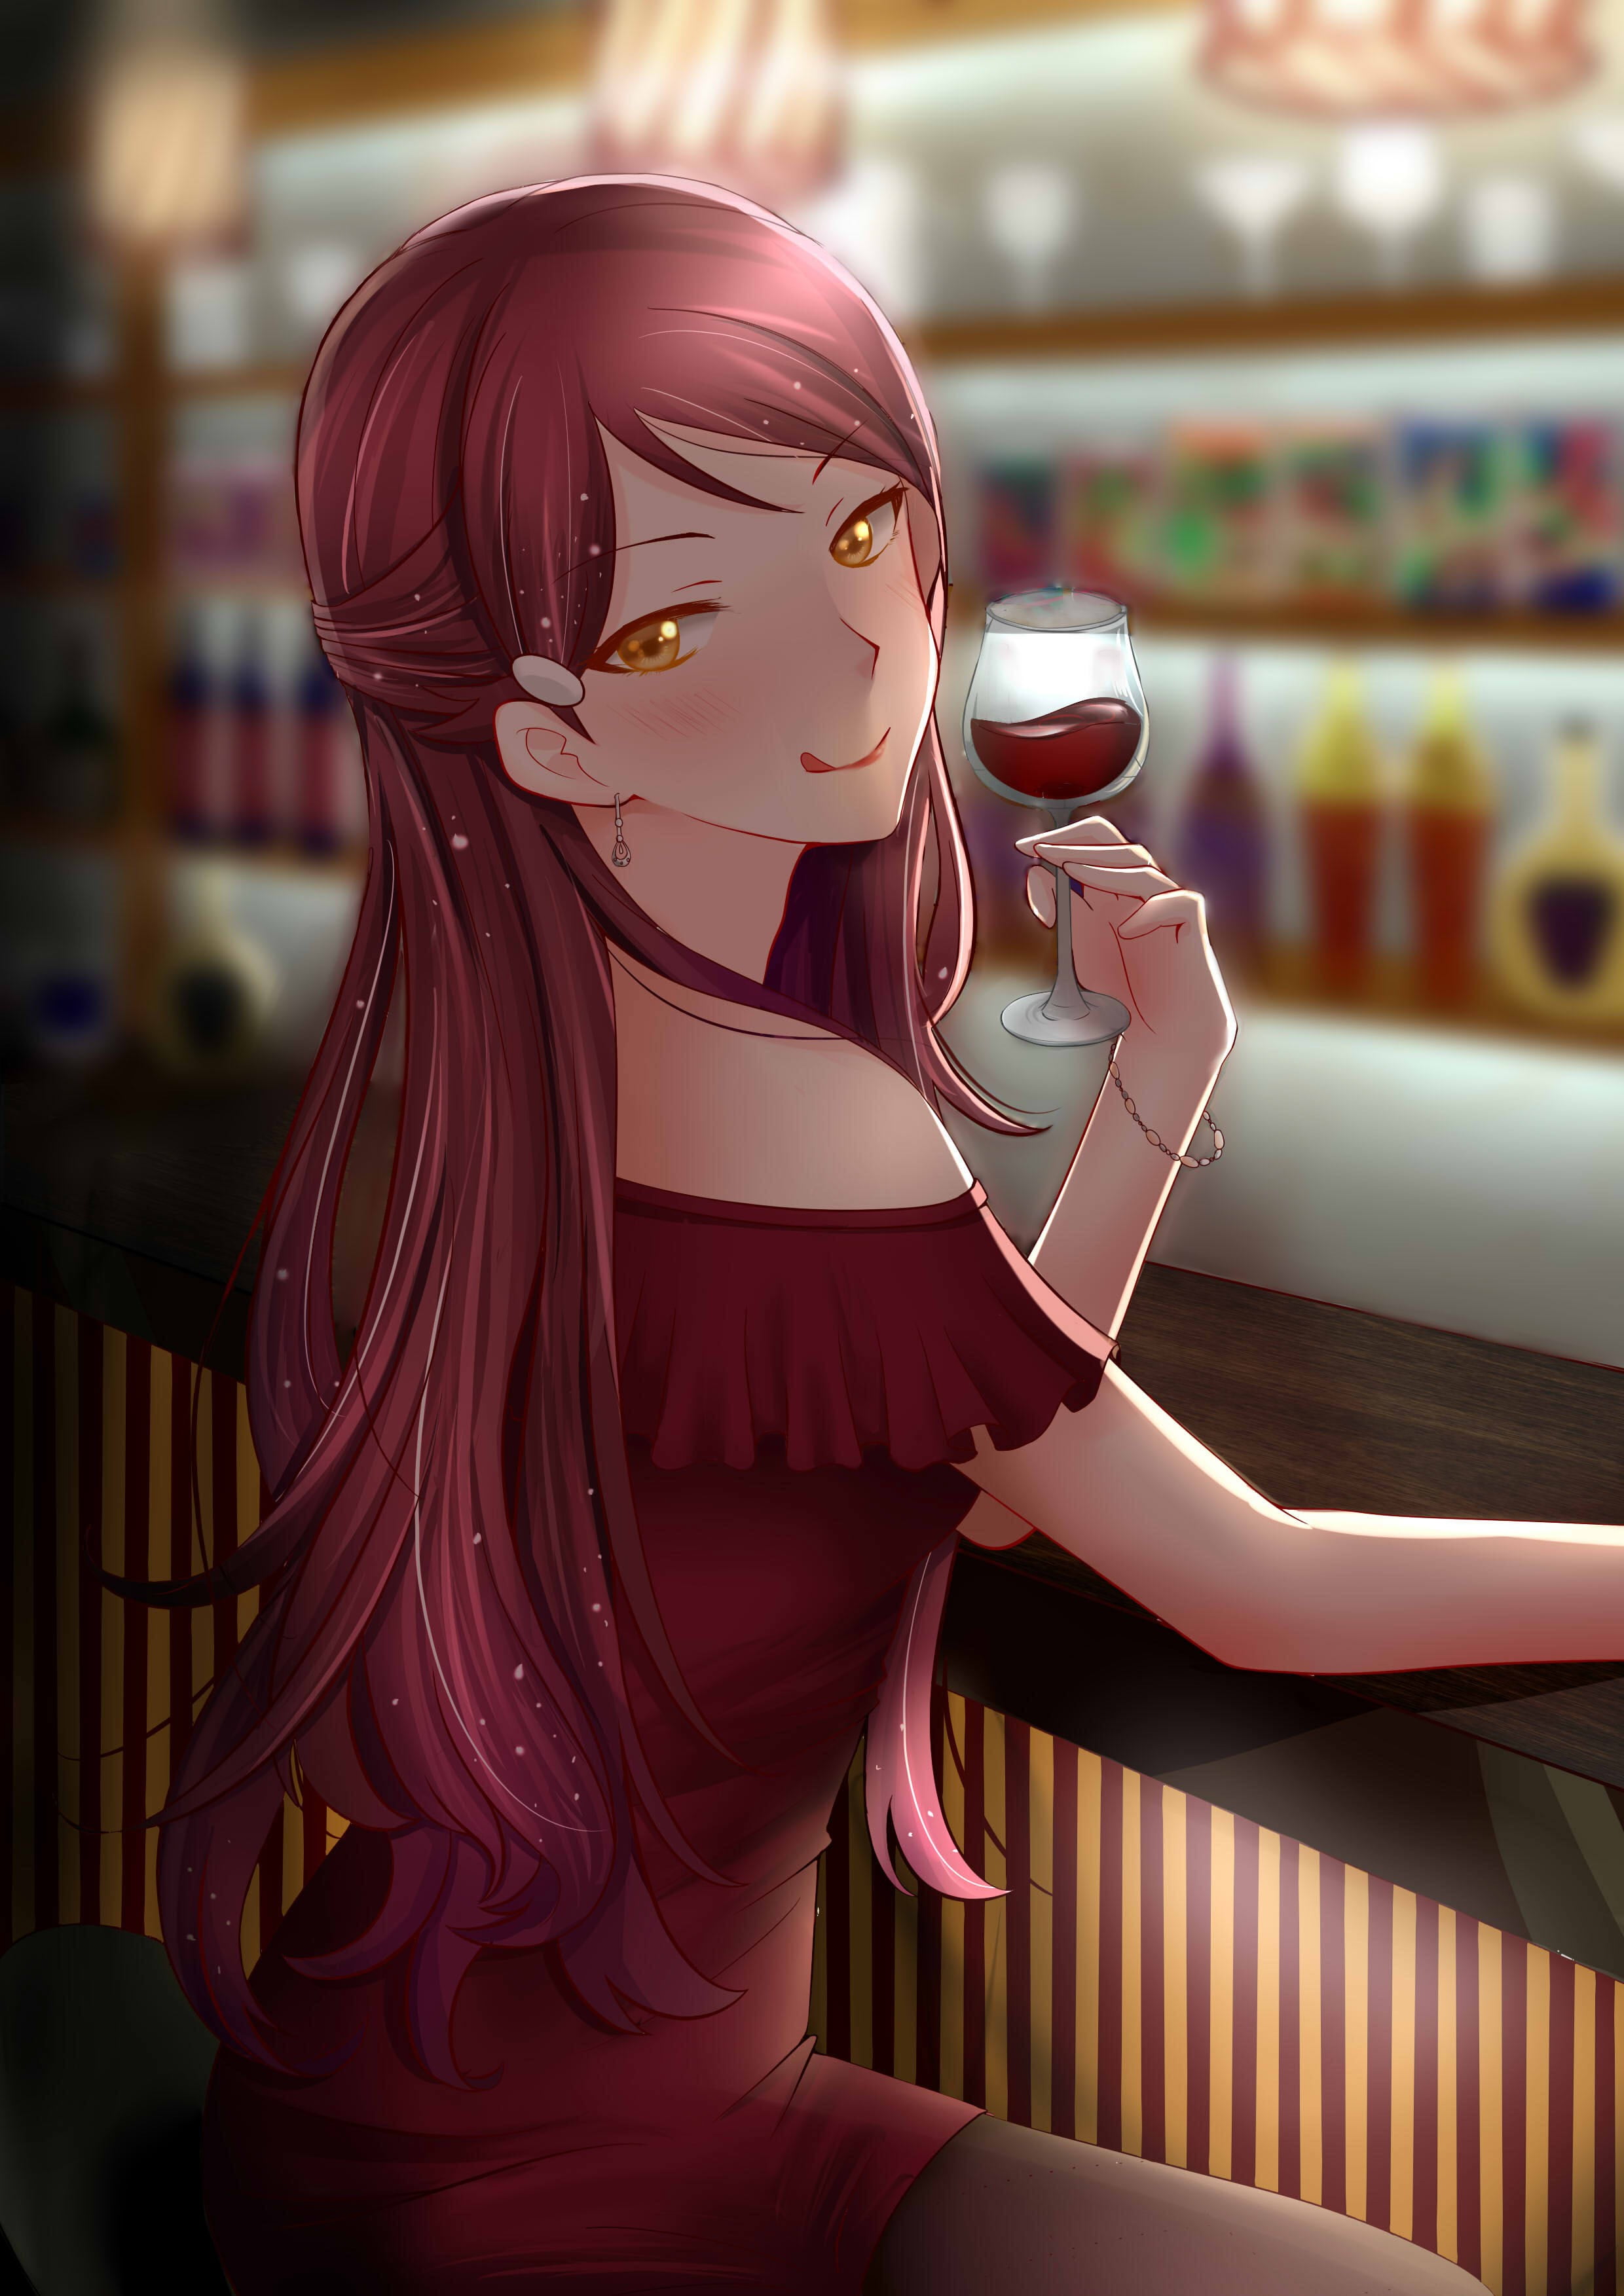 Girl anime character wearing red dress holding wine glass illustration